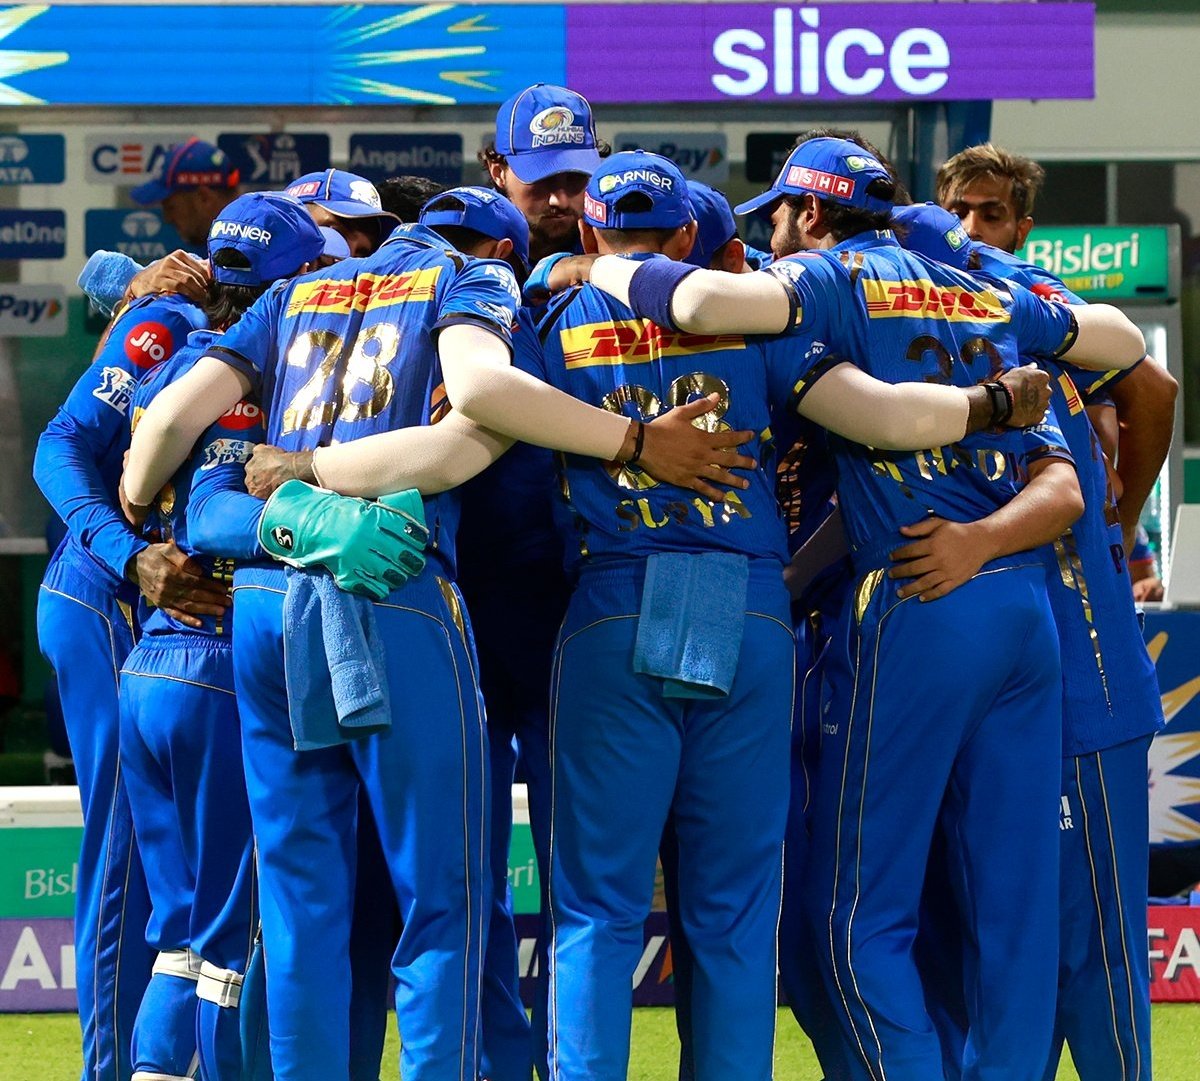 Just one game left. Try to finish well. Win or lose, Mumbai Indians forever.